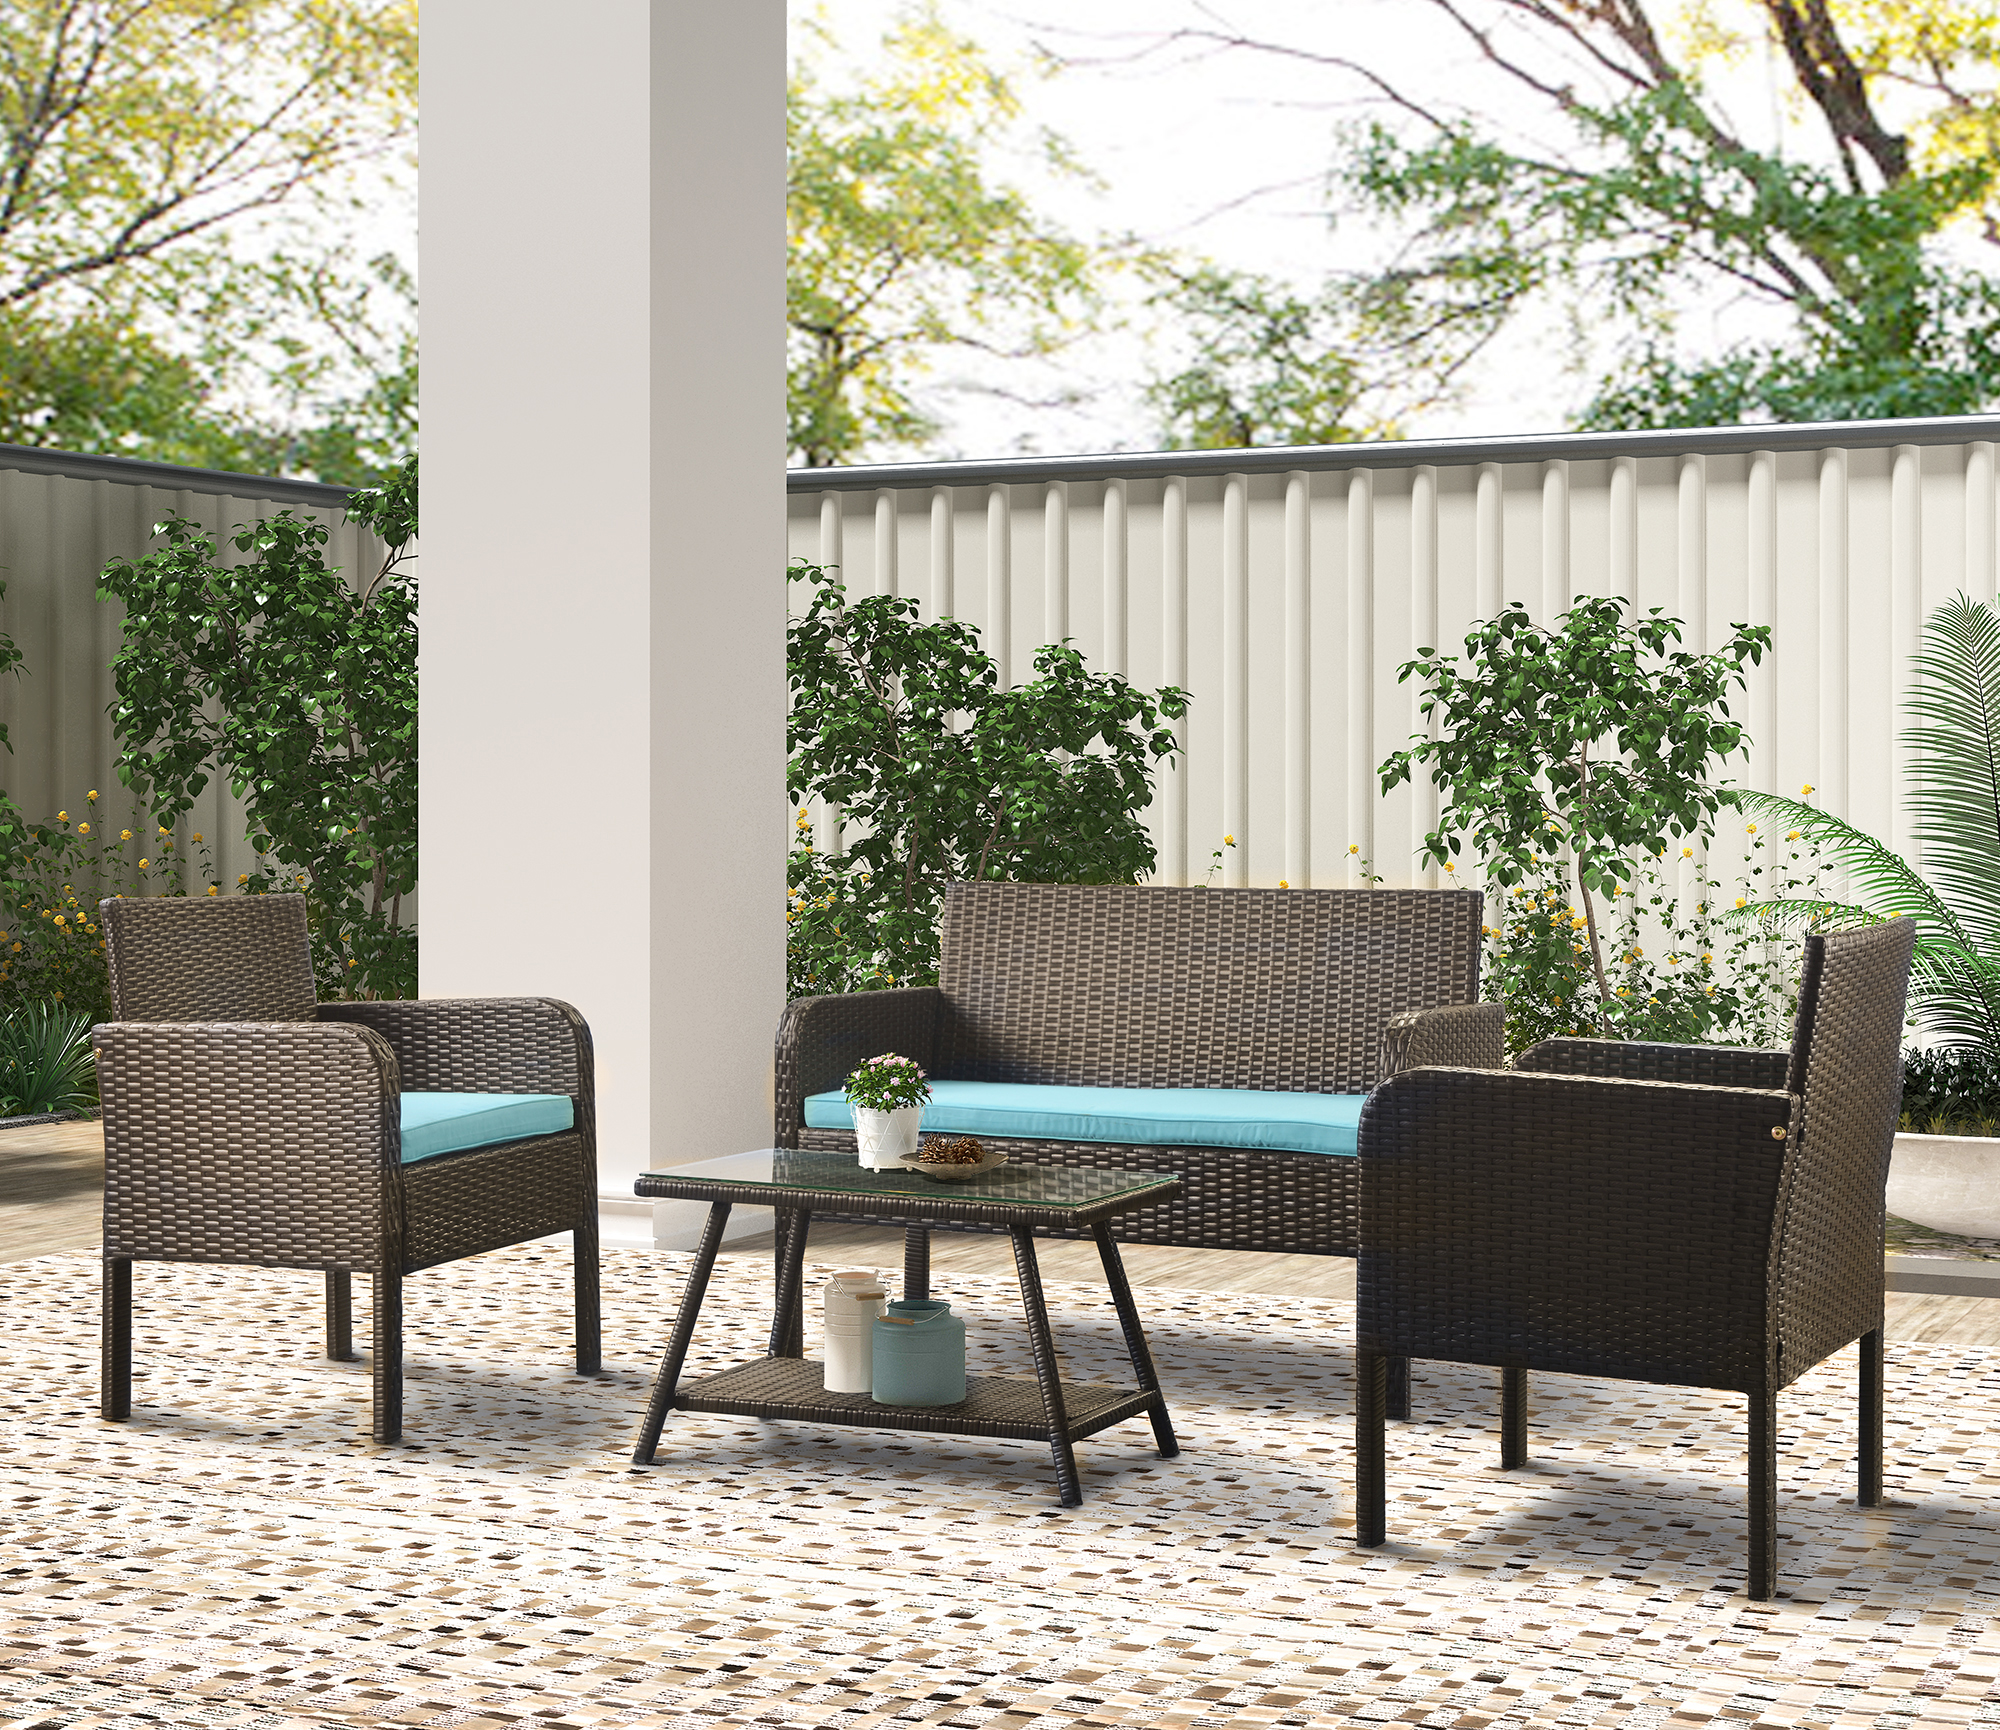 4 Piece Rattan Sofa Seating Group with Cushions, Outdoor Ratten sofa-Boyel Living